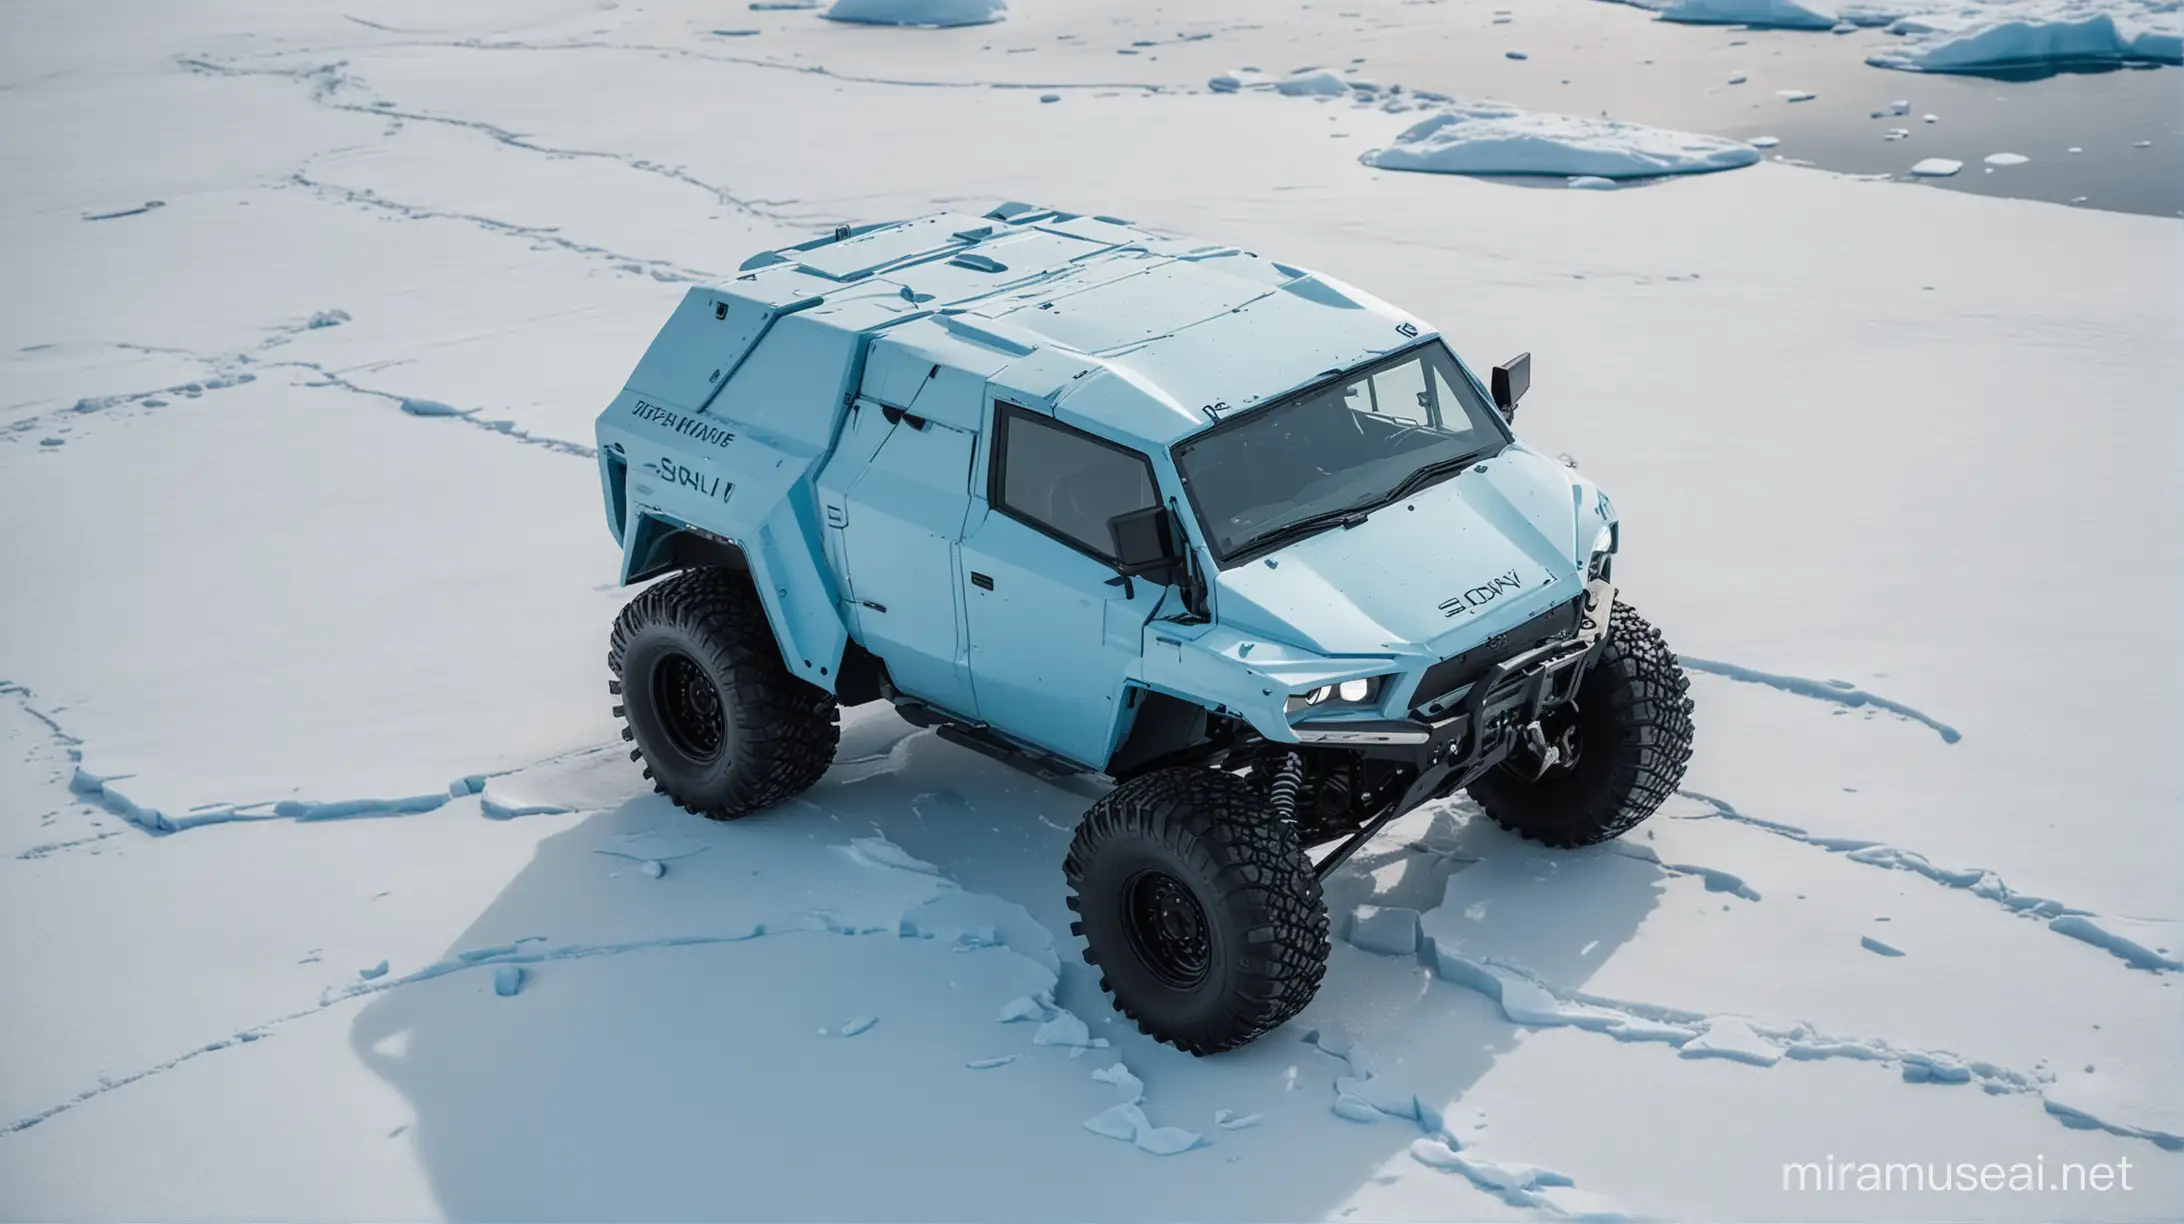 A very unusual-looking Cybertruck of the future parked on a glacier in Antarctica, its ice-blue finish blending with the frozen landscape, photographed from a top angle to showcase its resilience in extreme environments. Realistic, shot on a Sony DSLR, 250mm lens f/2.8, ultra detailed.